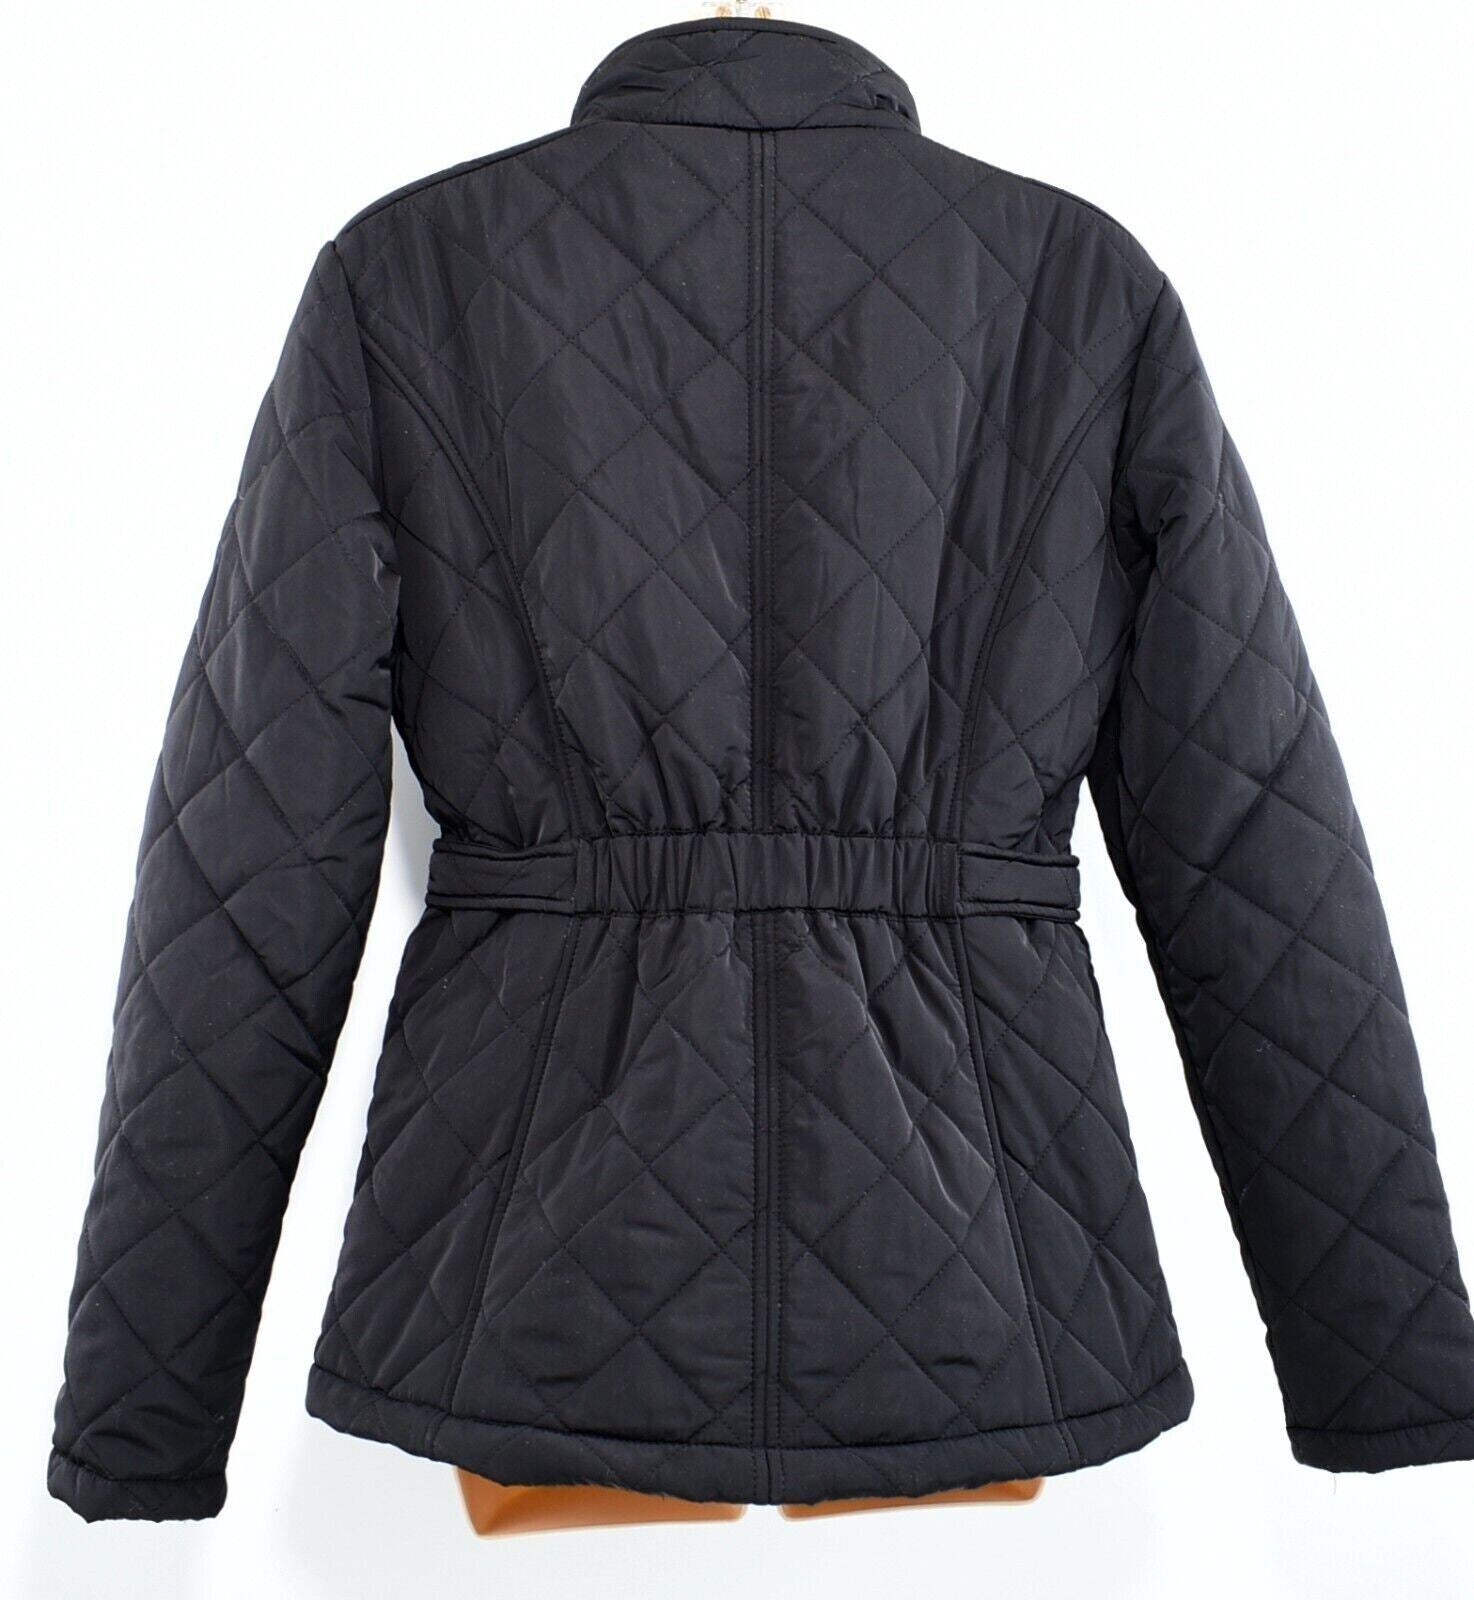 FIRETRAP Women's EMPIRE Quilted Jacket, Black, size M / UK 12